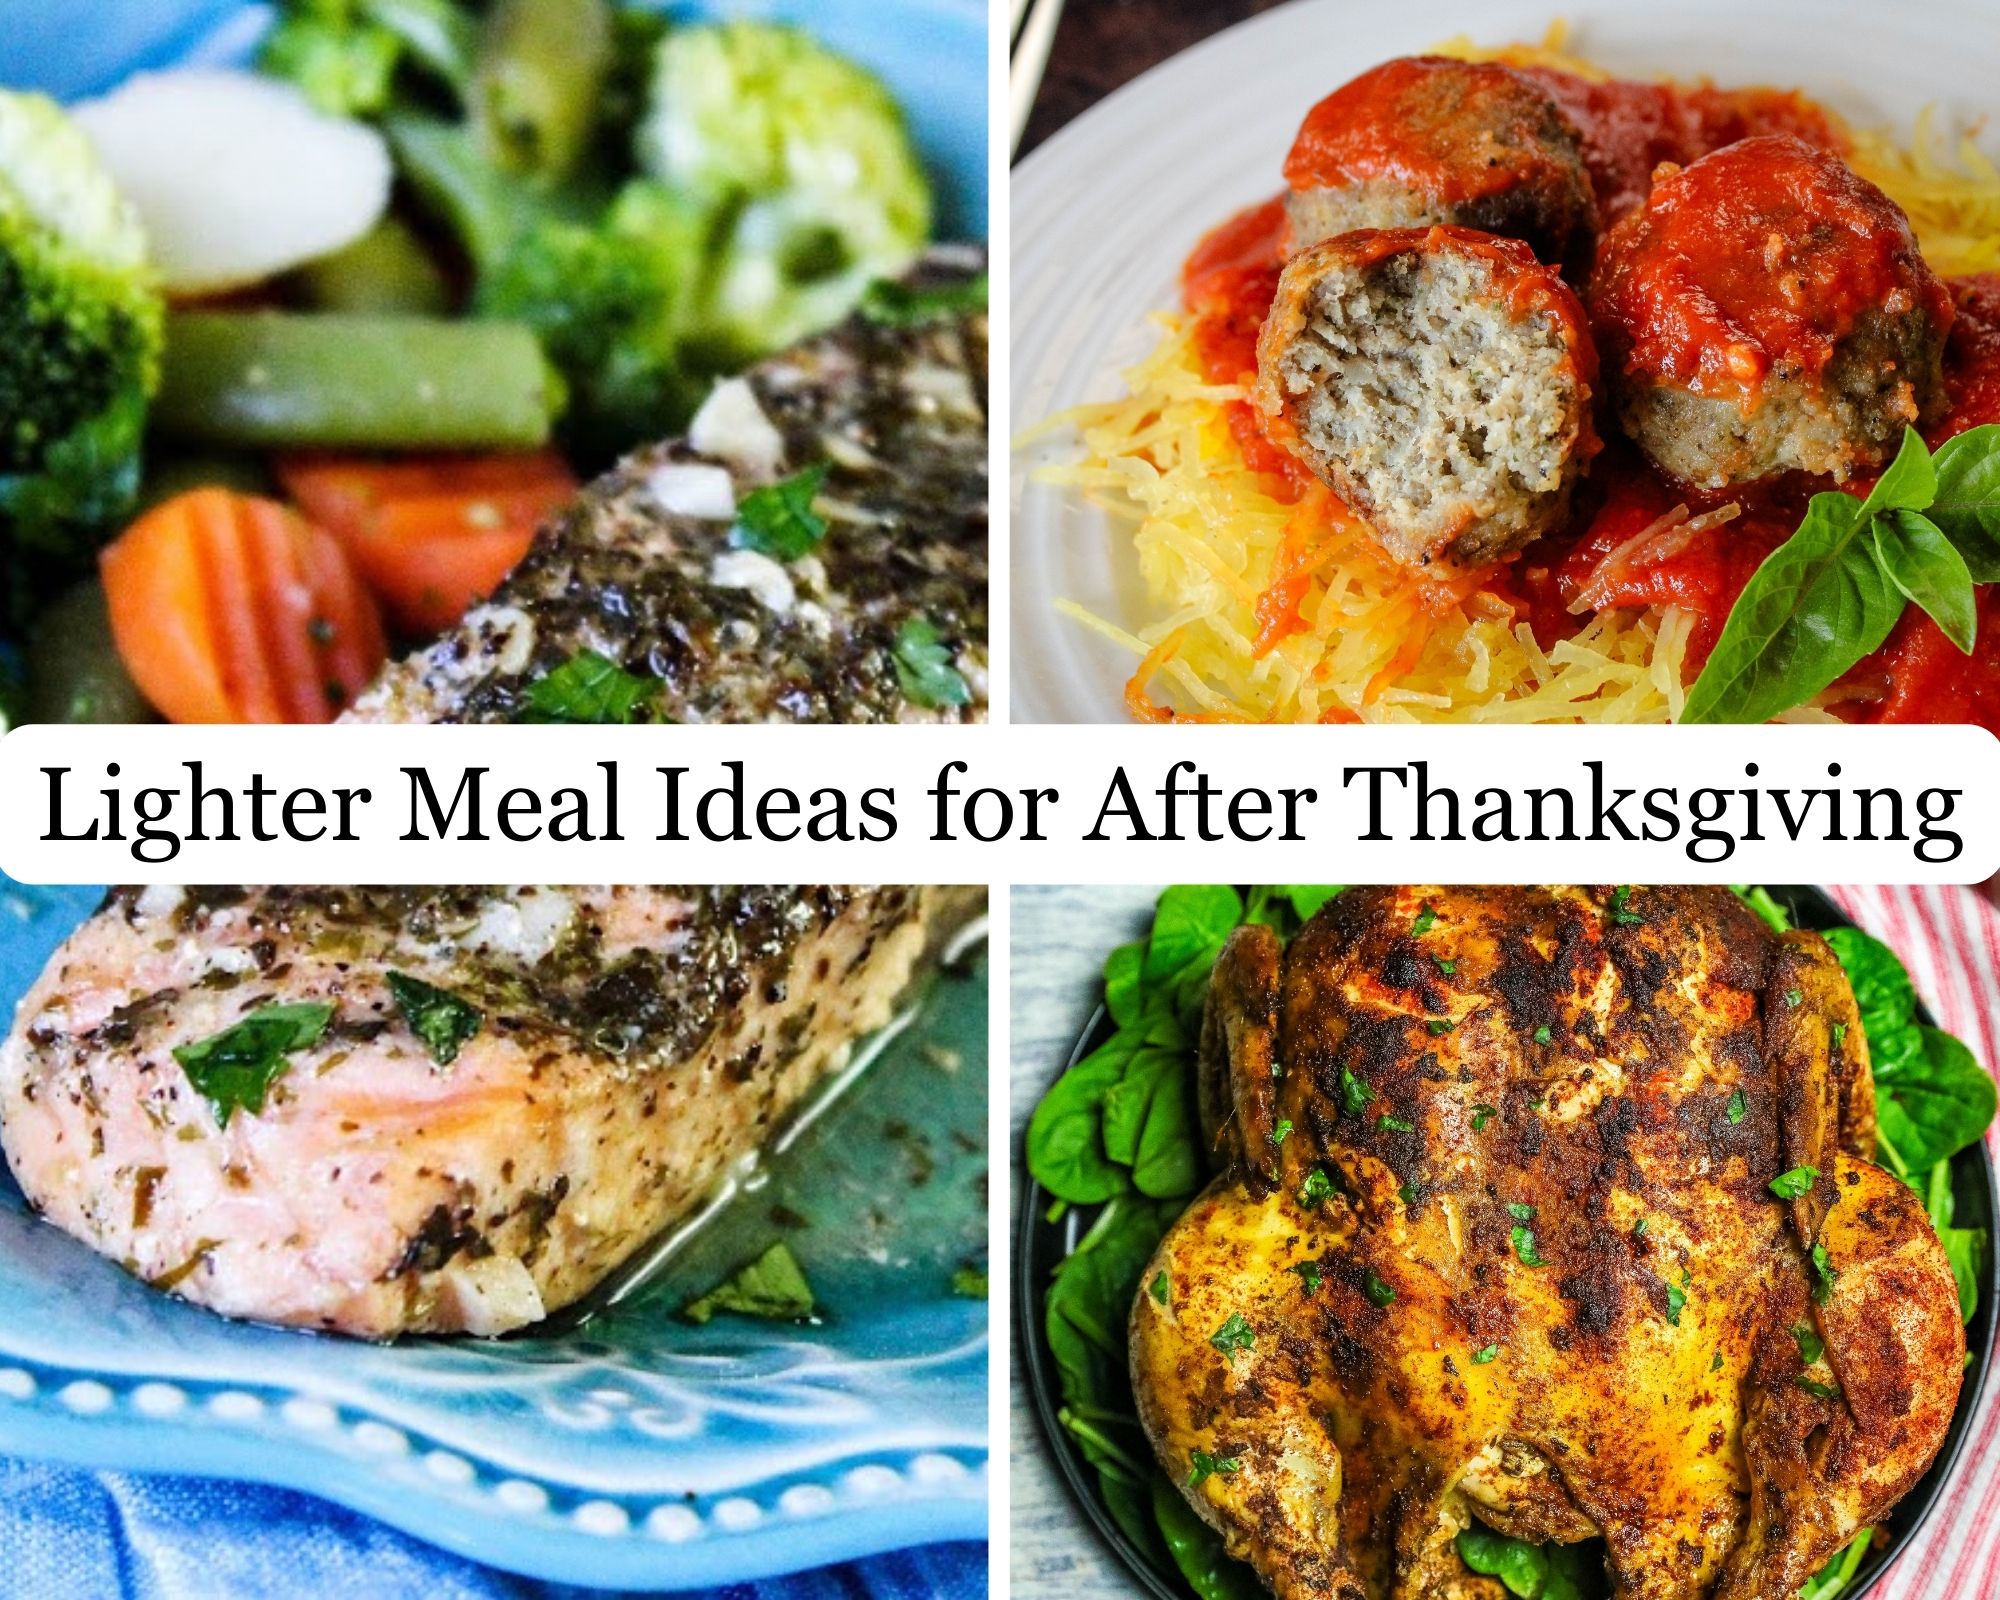 Lighter Meal Ideas for After Thanksgiving